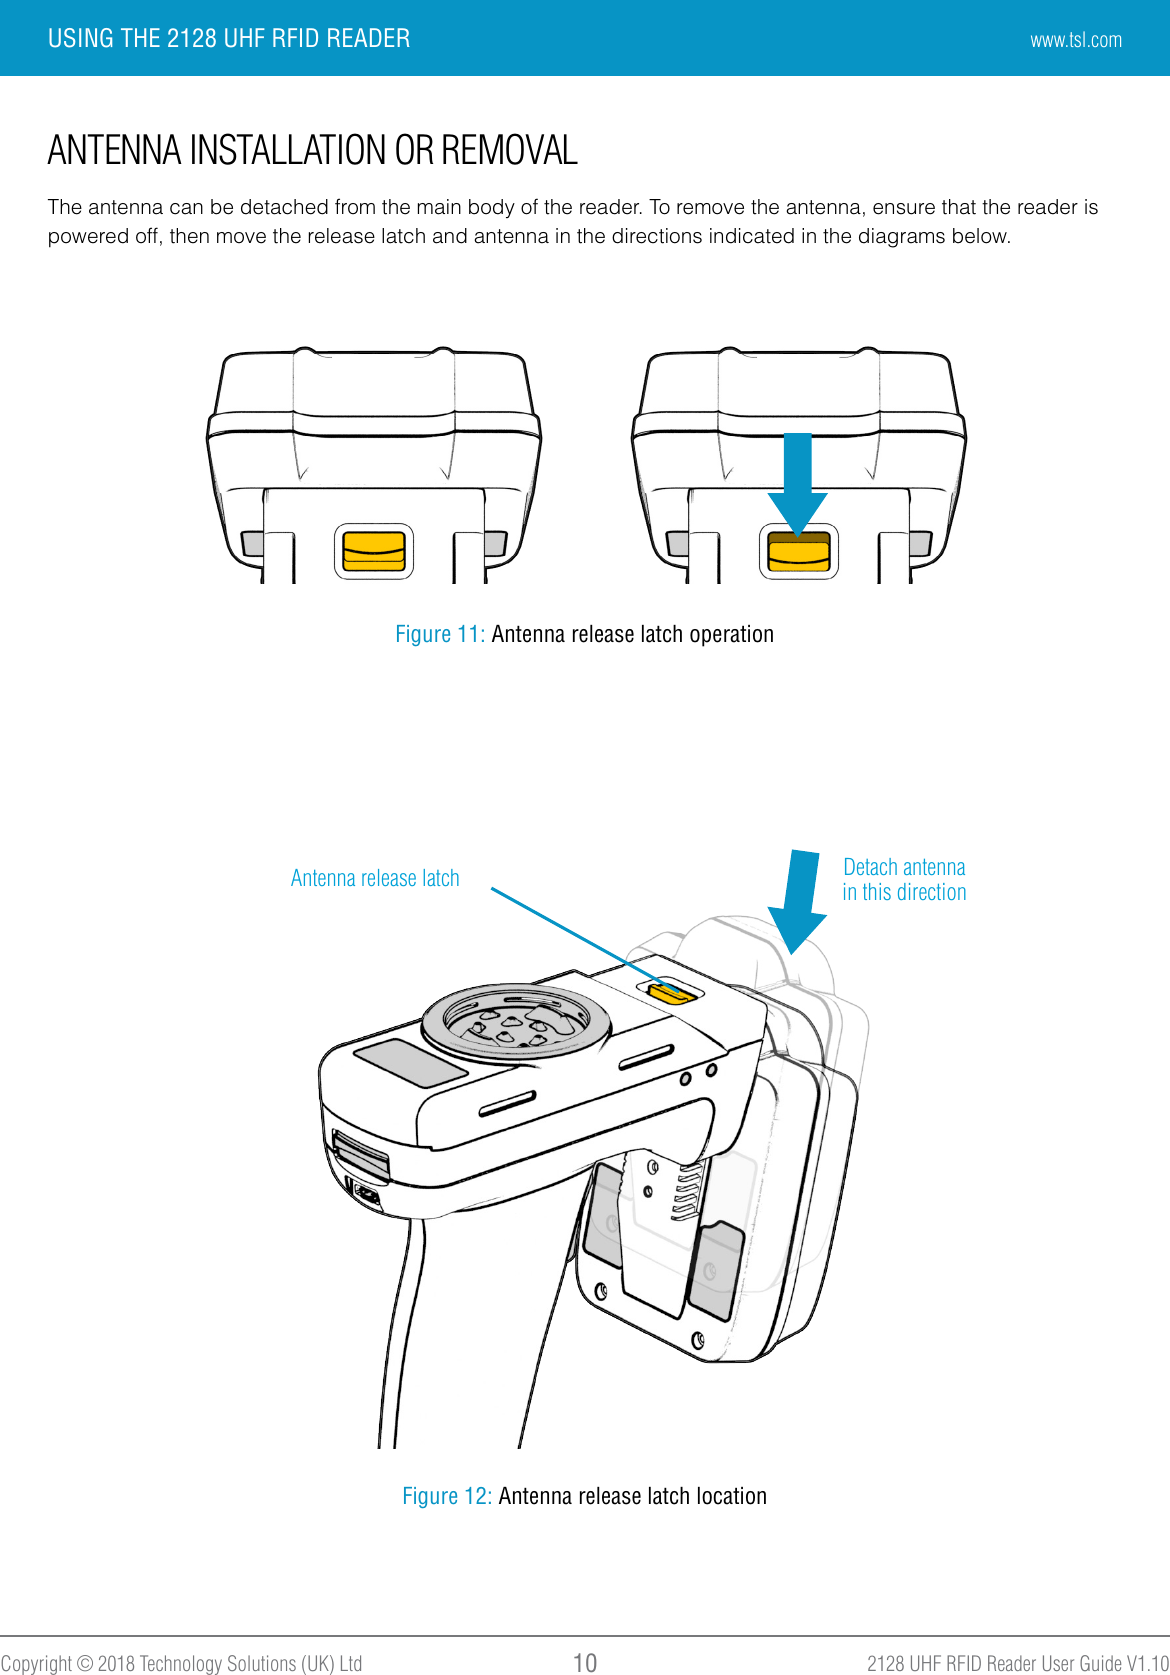 2128 UHF RFID Reader User Guide V1.10Copyright © 2018 Technology Solutions (UK) Ltd 10USING THE 2128 UHF RFID READERANTENNA INSTALLATION OR REMOVALThe antenna can be detached from the main body of the reader. To remove the antenna, ensure that the reader ispowered off, then move the release latch and antenna in the directions indicated in the diagrams below.Figure 11: Antenna release latch operationAntenna release latch Detach antenna in this directionFigure 12: Antenna release latch locationwww.tsl.com